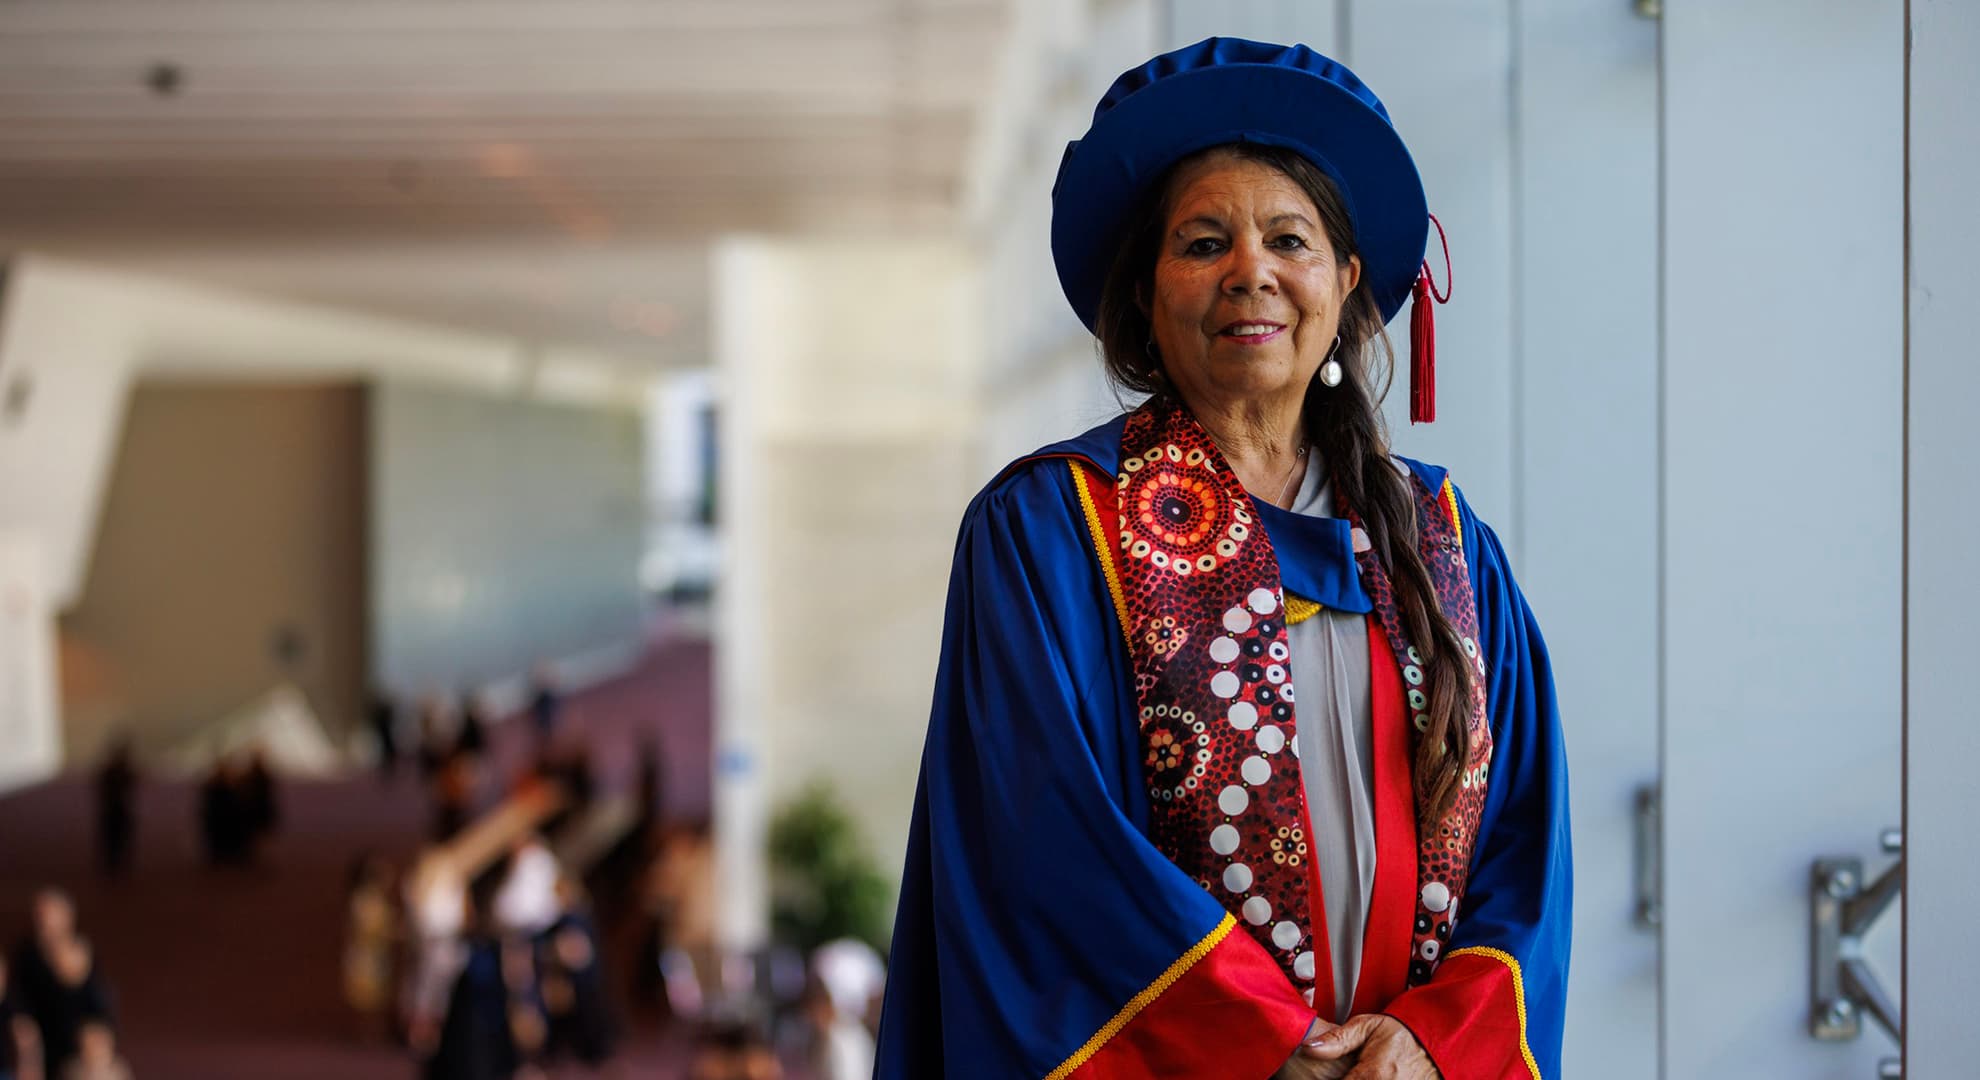 Lady standing in full doctoral regalia